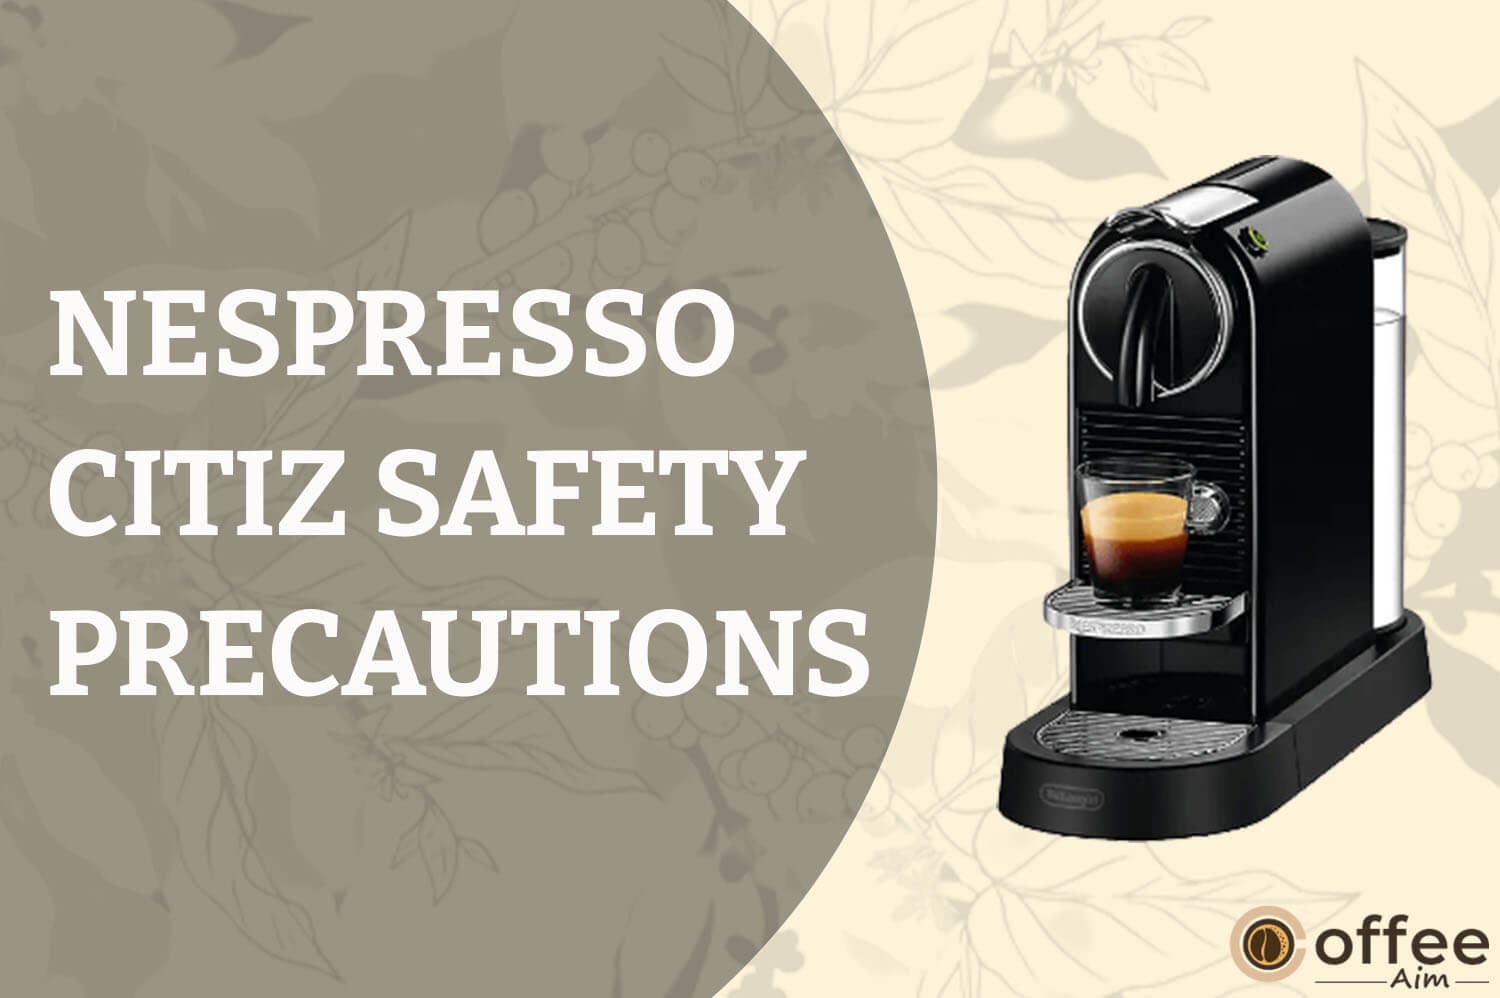 Featured image for the article "Nespresso Citiz Safety Precautions"